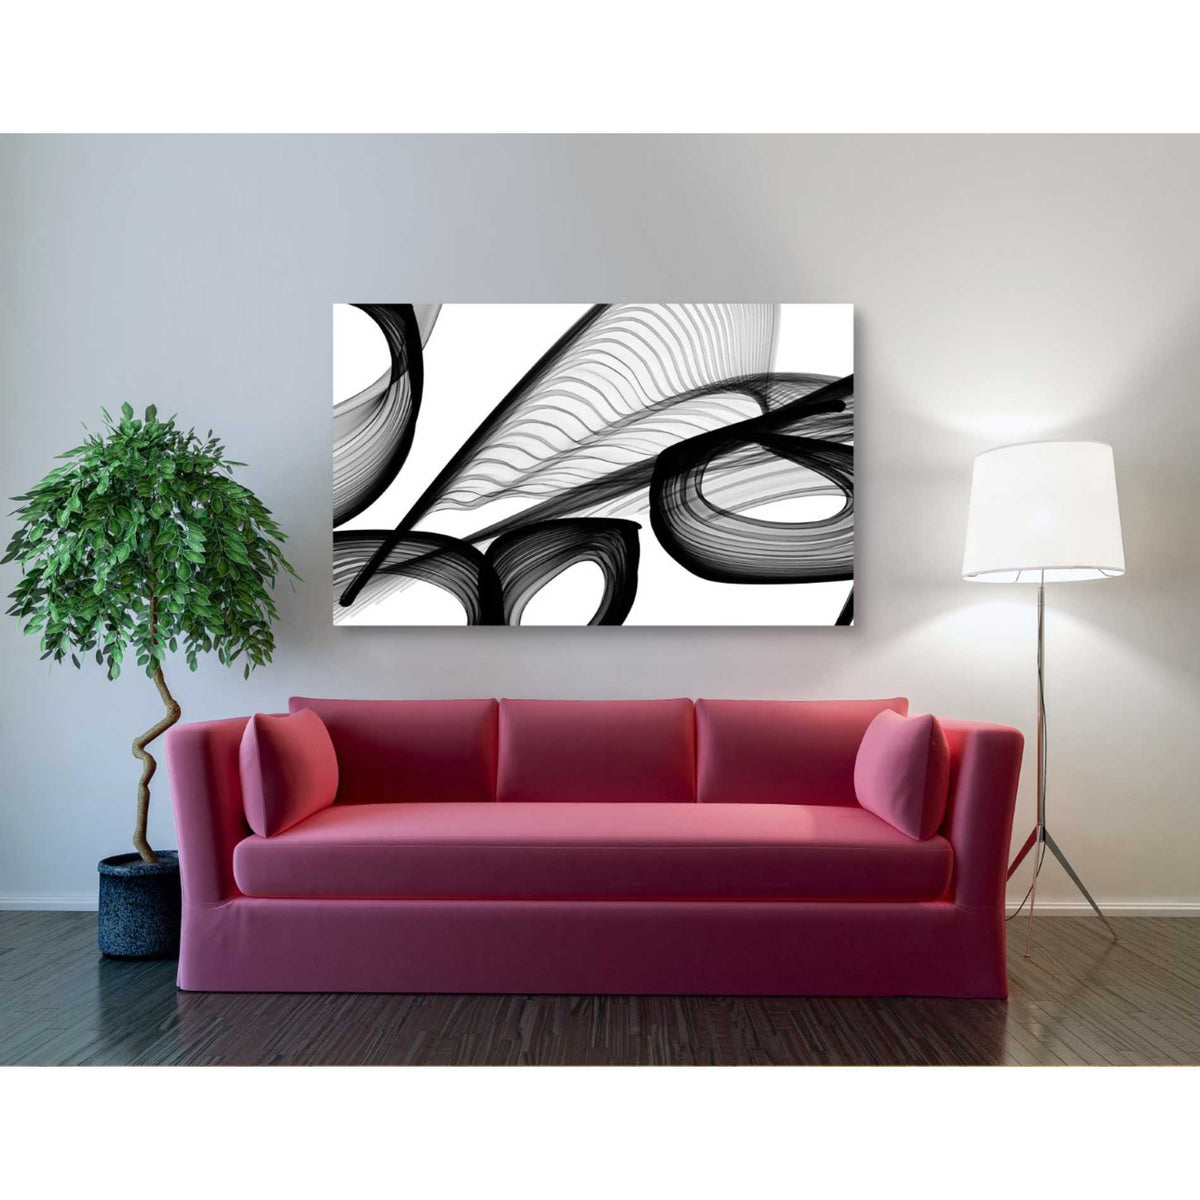 Epic Graffiti &#39;Abstract Black and White 22-21&#39; by Irena Orlov, Giclee Canvas Wall Art